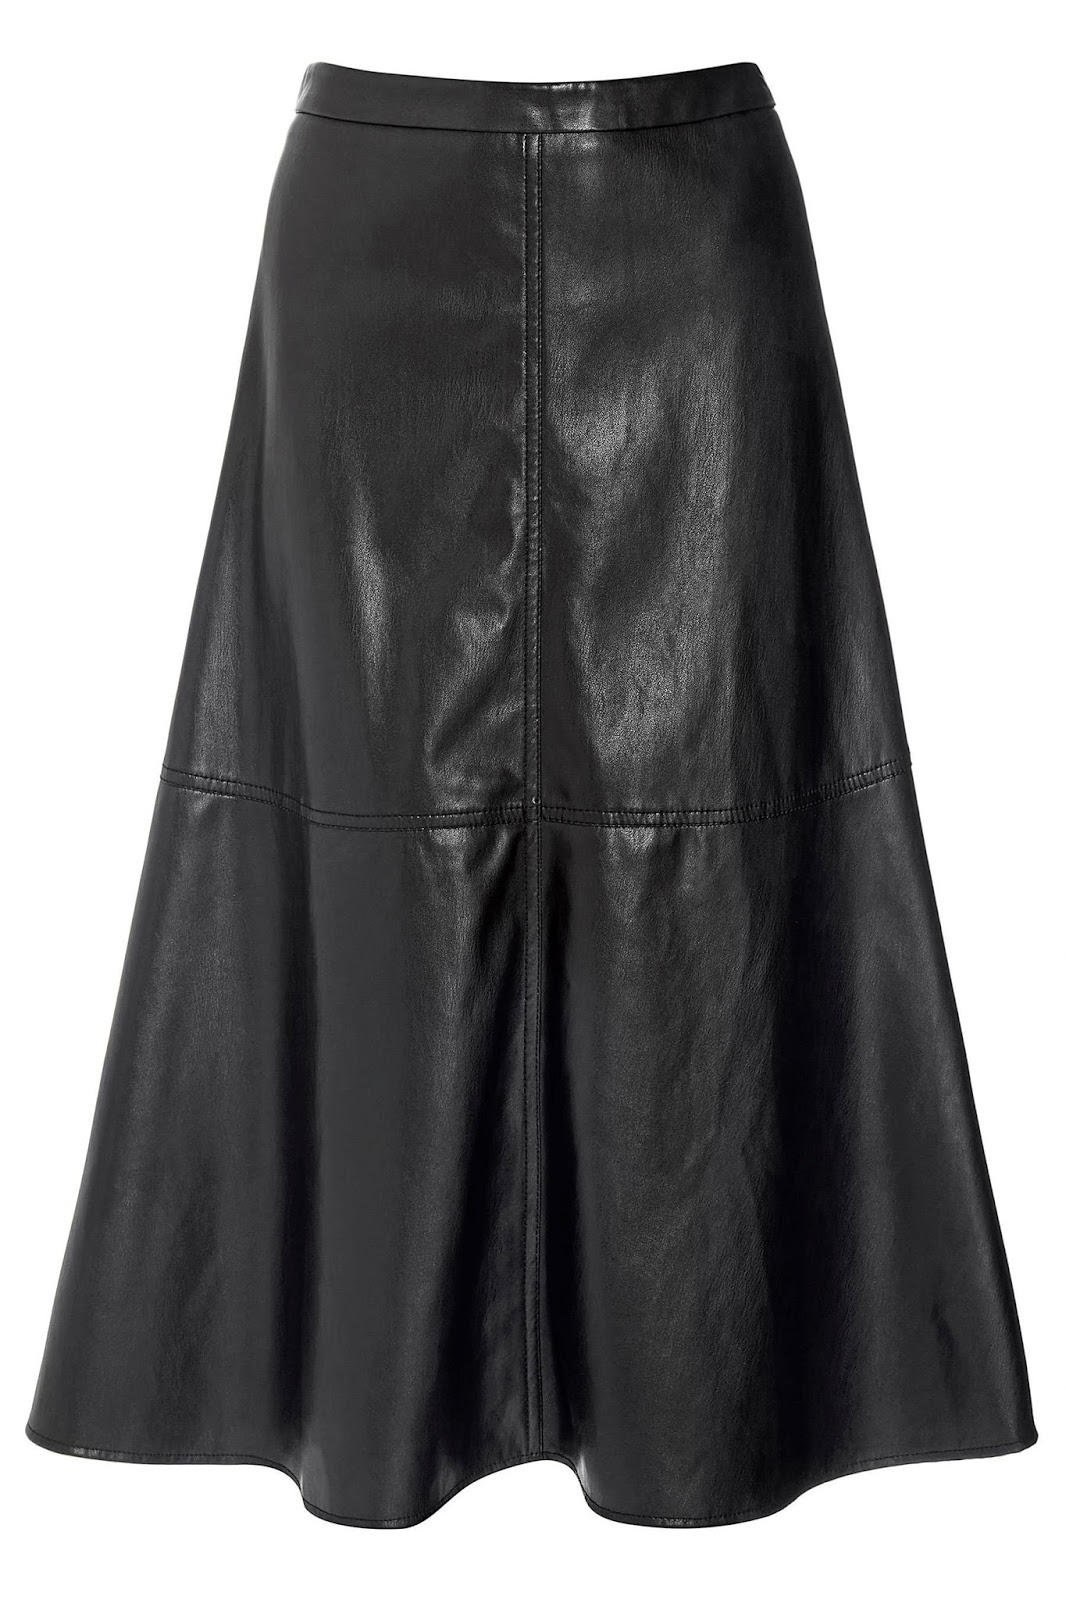 Frugal buy: Next faux leather skirt